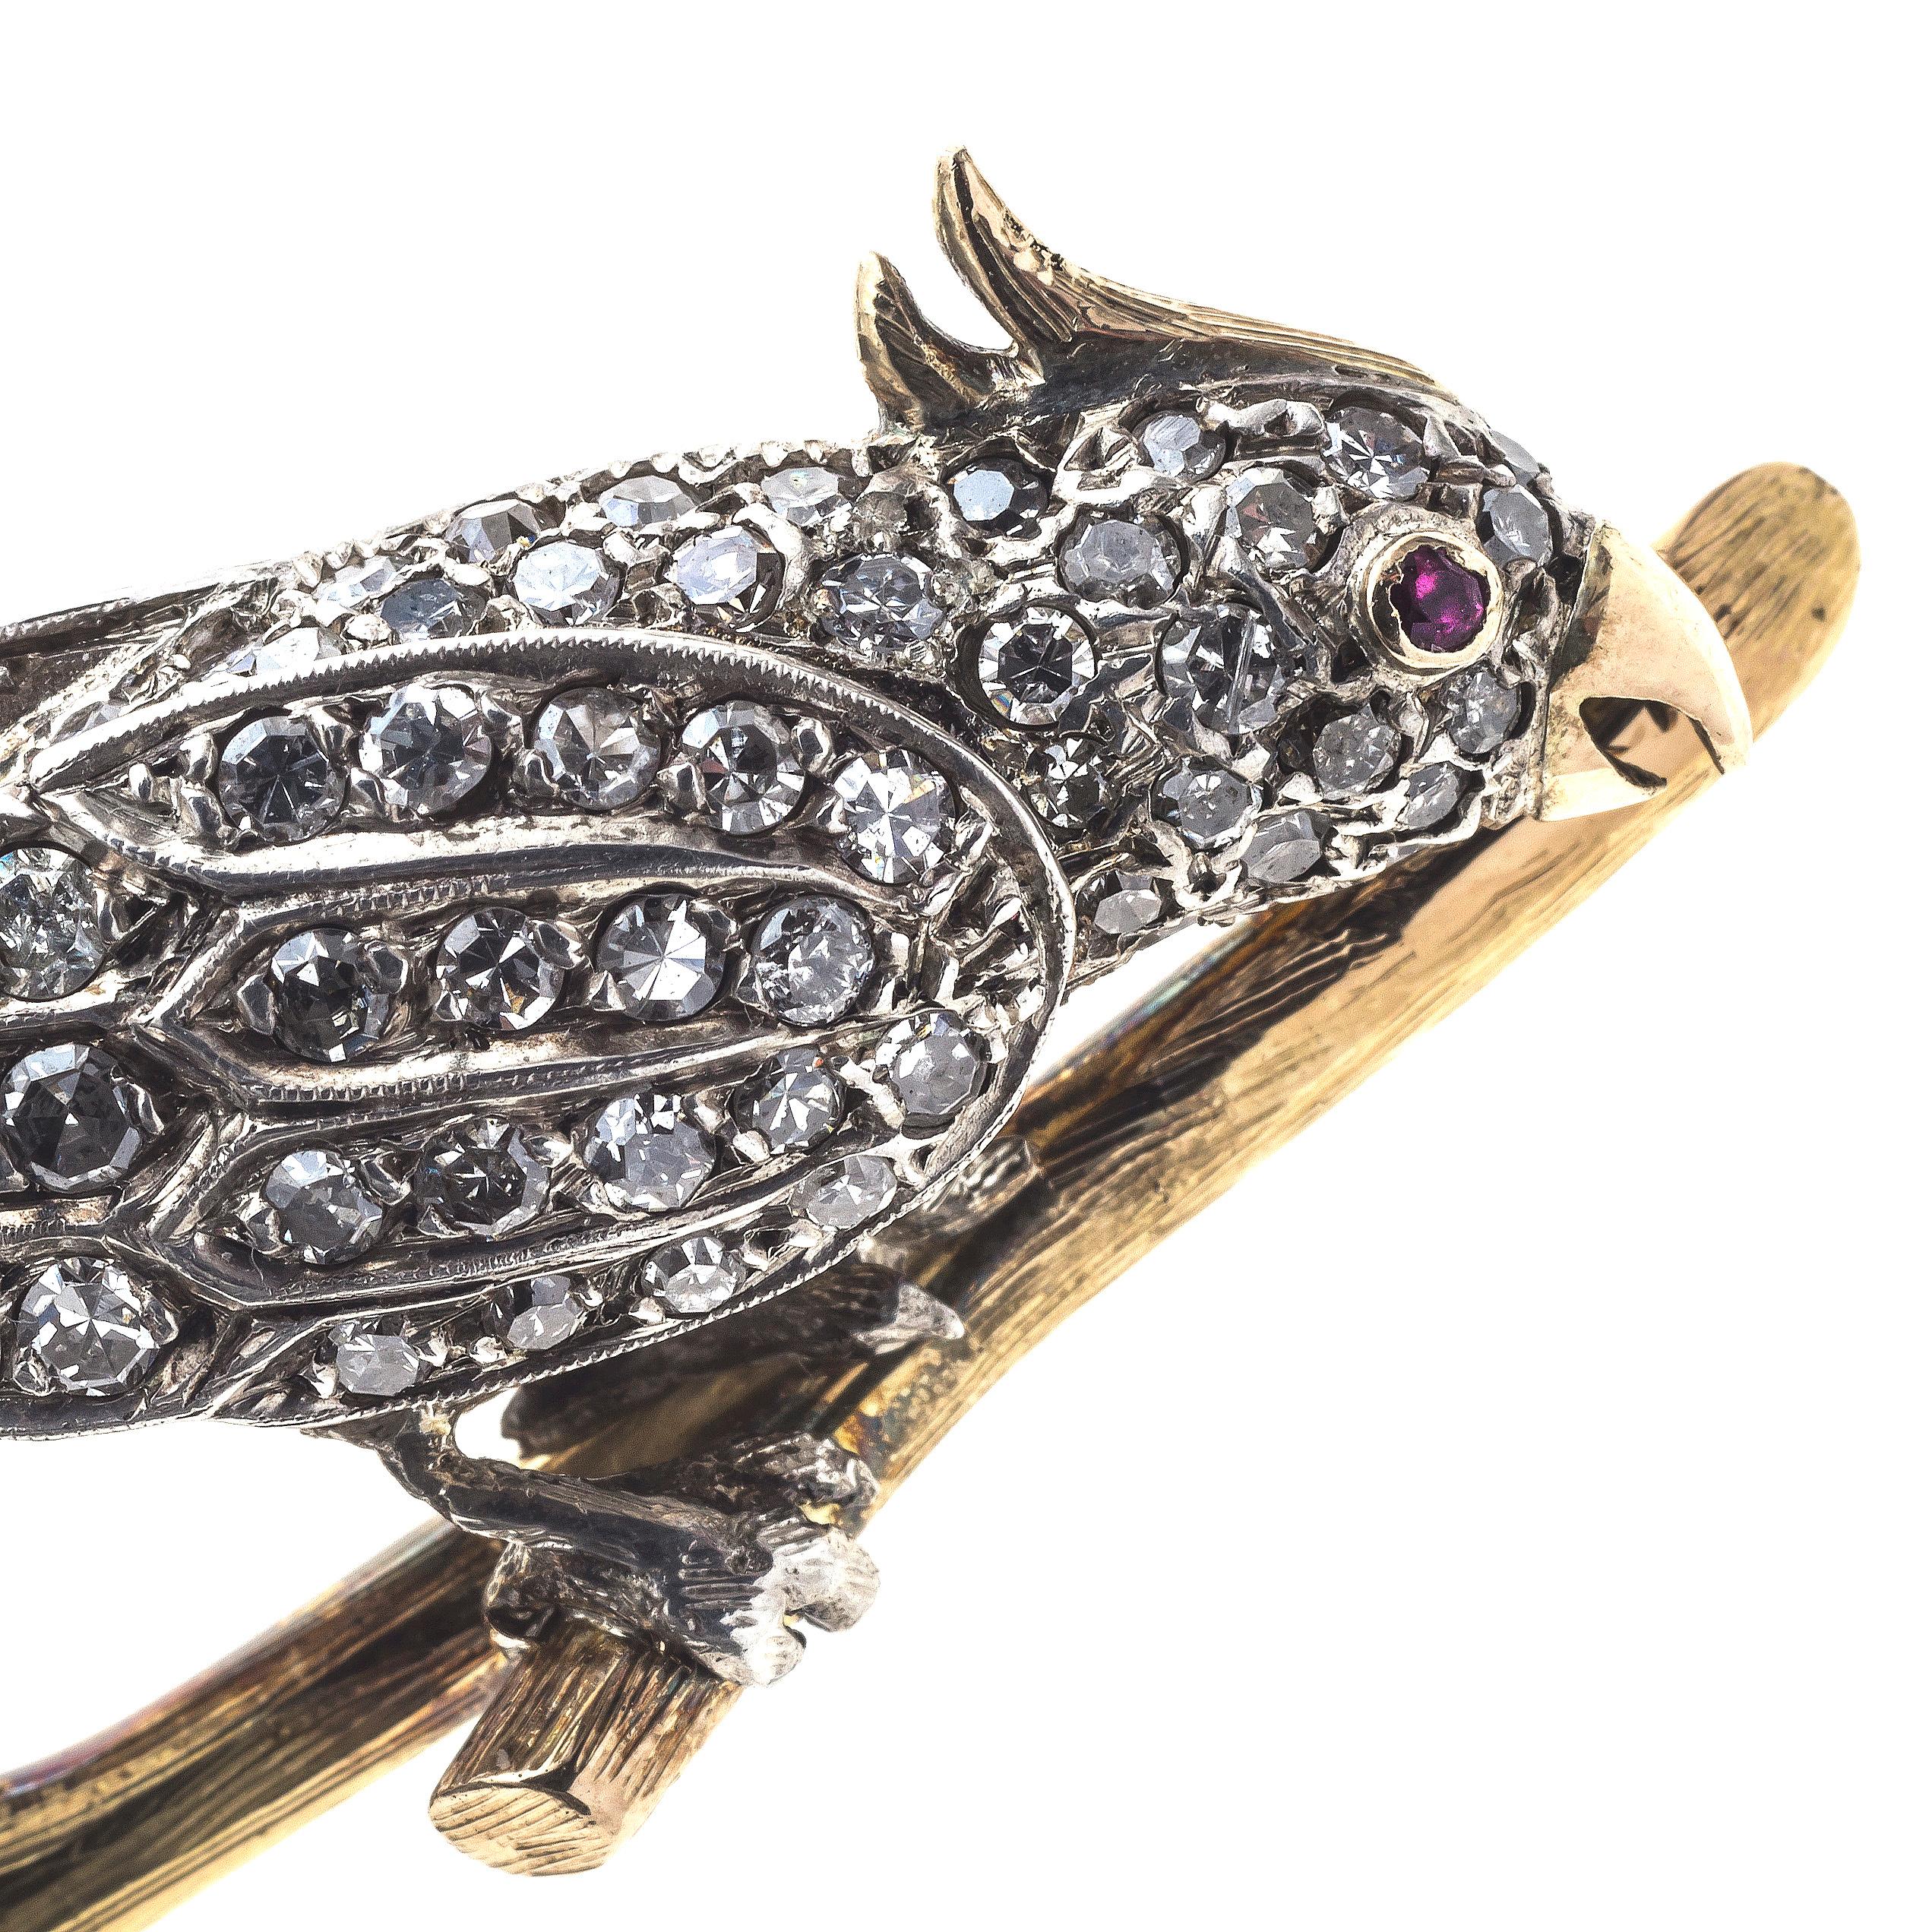 The platinum and 14K yellow gold cockatoo is sitting on an engraved golden branch. The bird has a golden feather bonnet and golden beak, a ruby set in gold is the eye. The platinum body of the cockatoo is completely set with diamonds. The reverse of